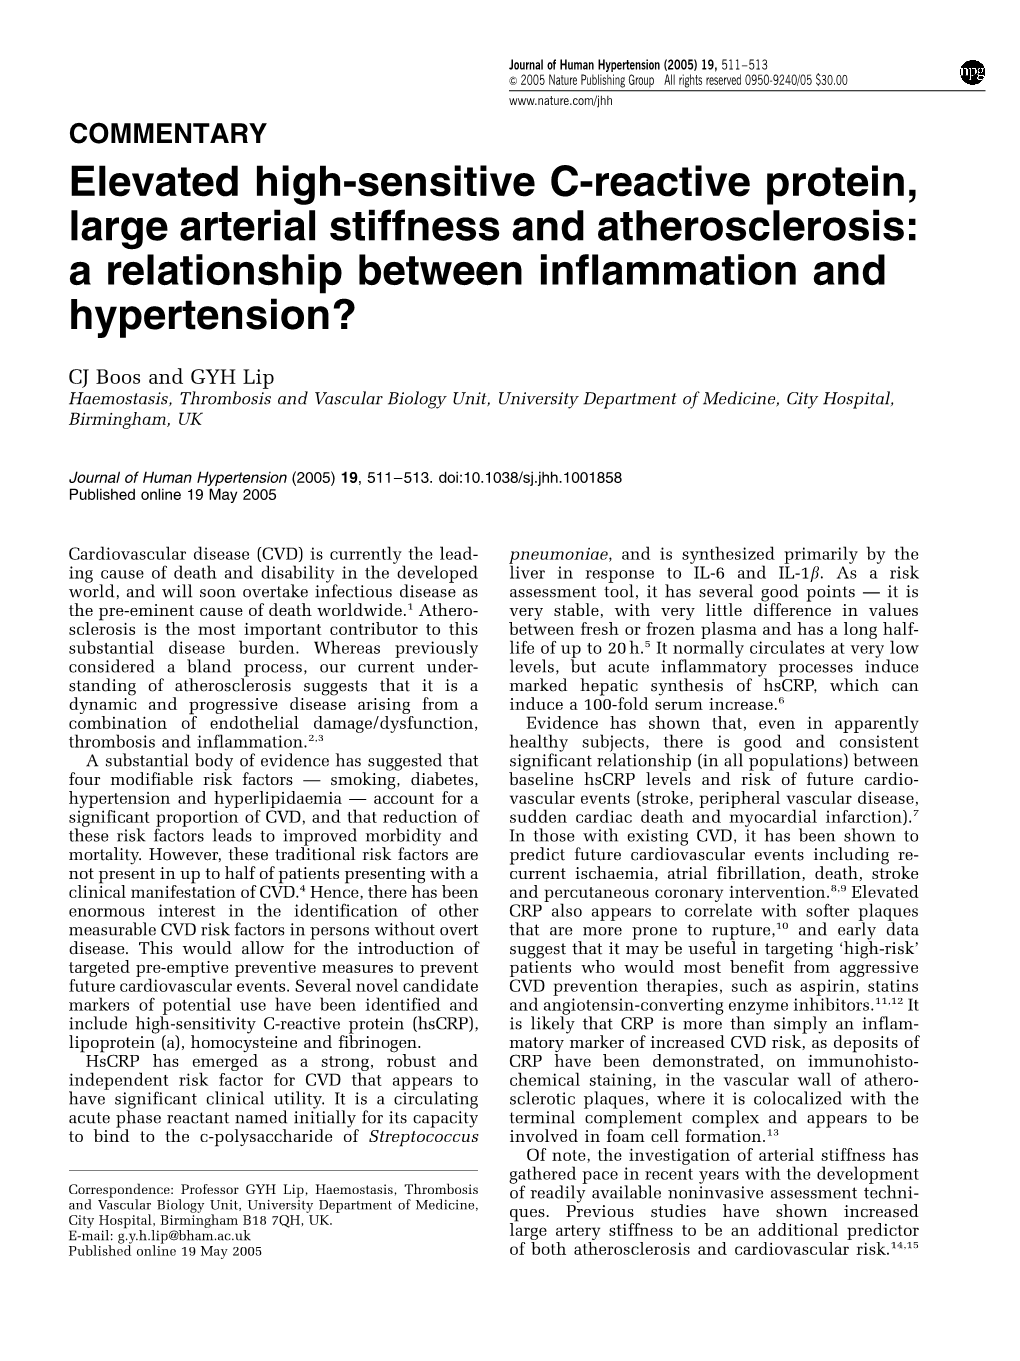 Elevated High-Sensitive C-Reactive Protein, Large Arterial Stiffness and Atherosclerosis: a Relationship Between Inflammation and Hypertension?